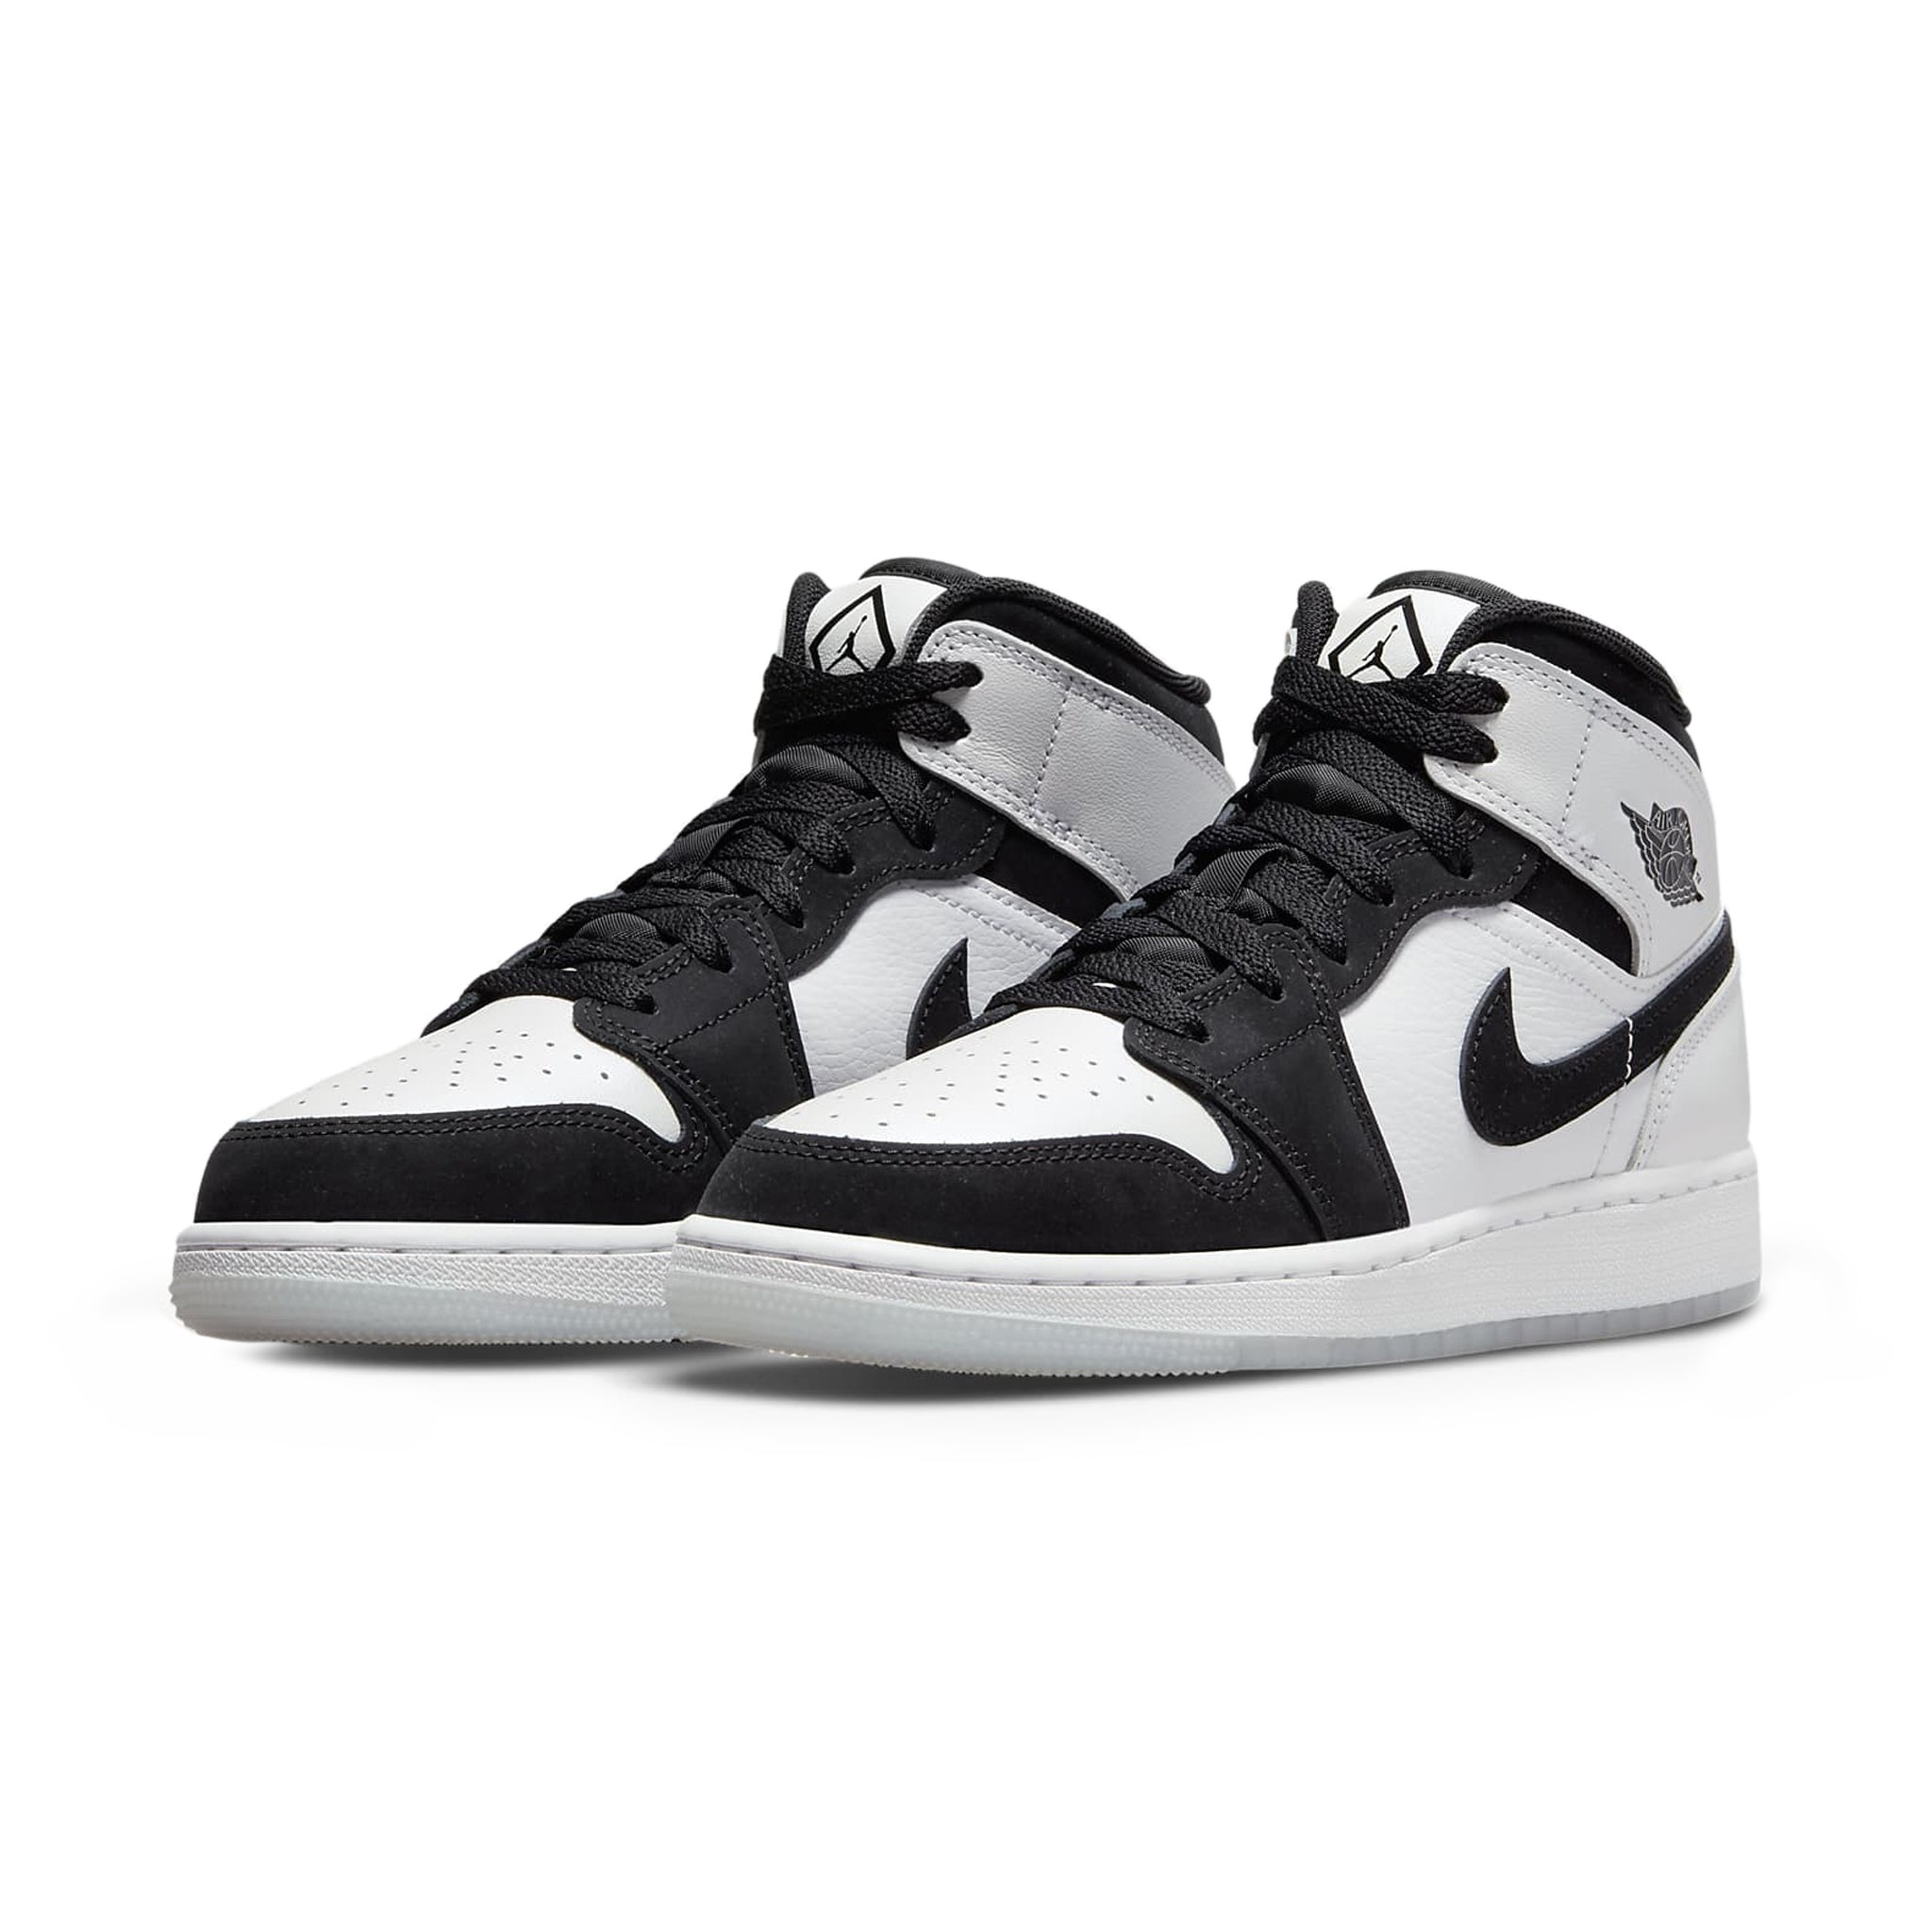 Front side view of Air Jordan 1 Mid Diamond Shorts (GS) DN4321-100